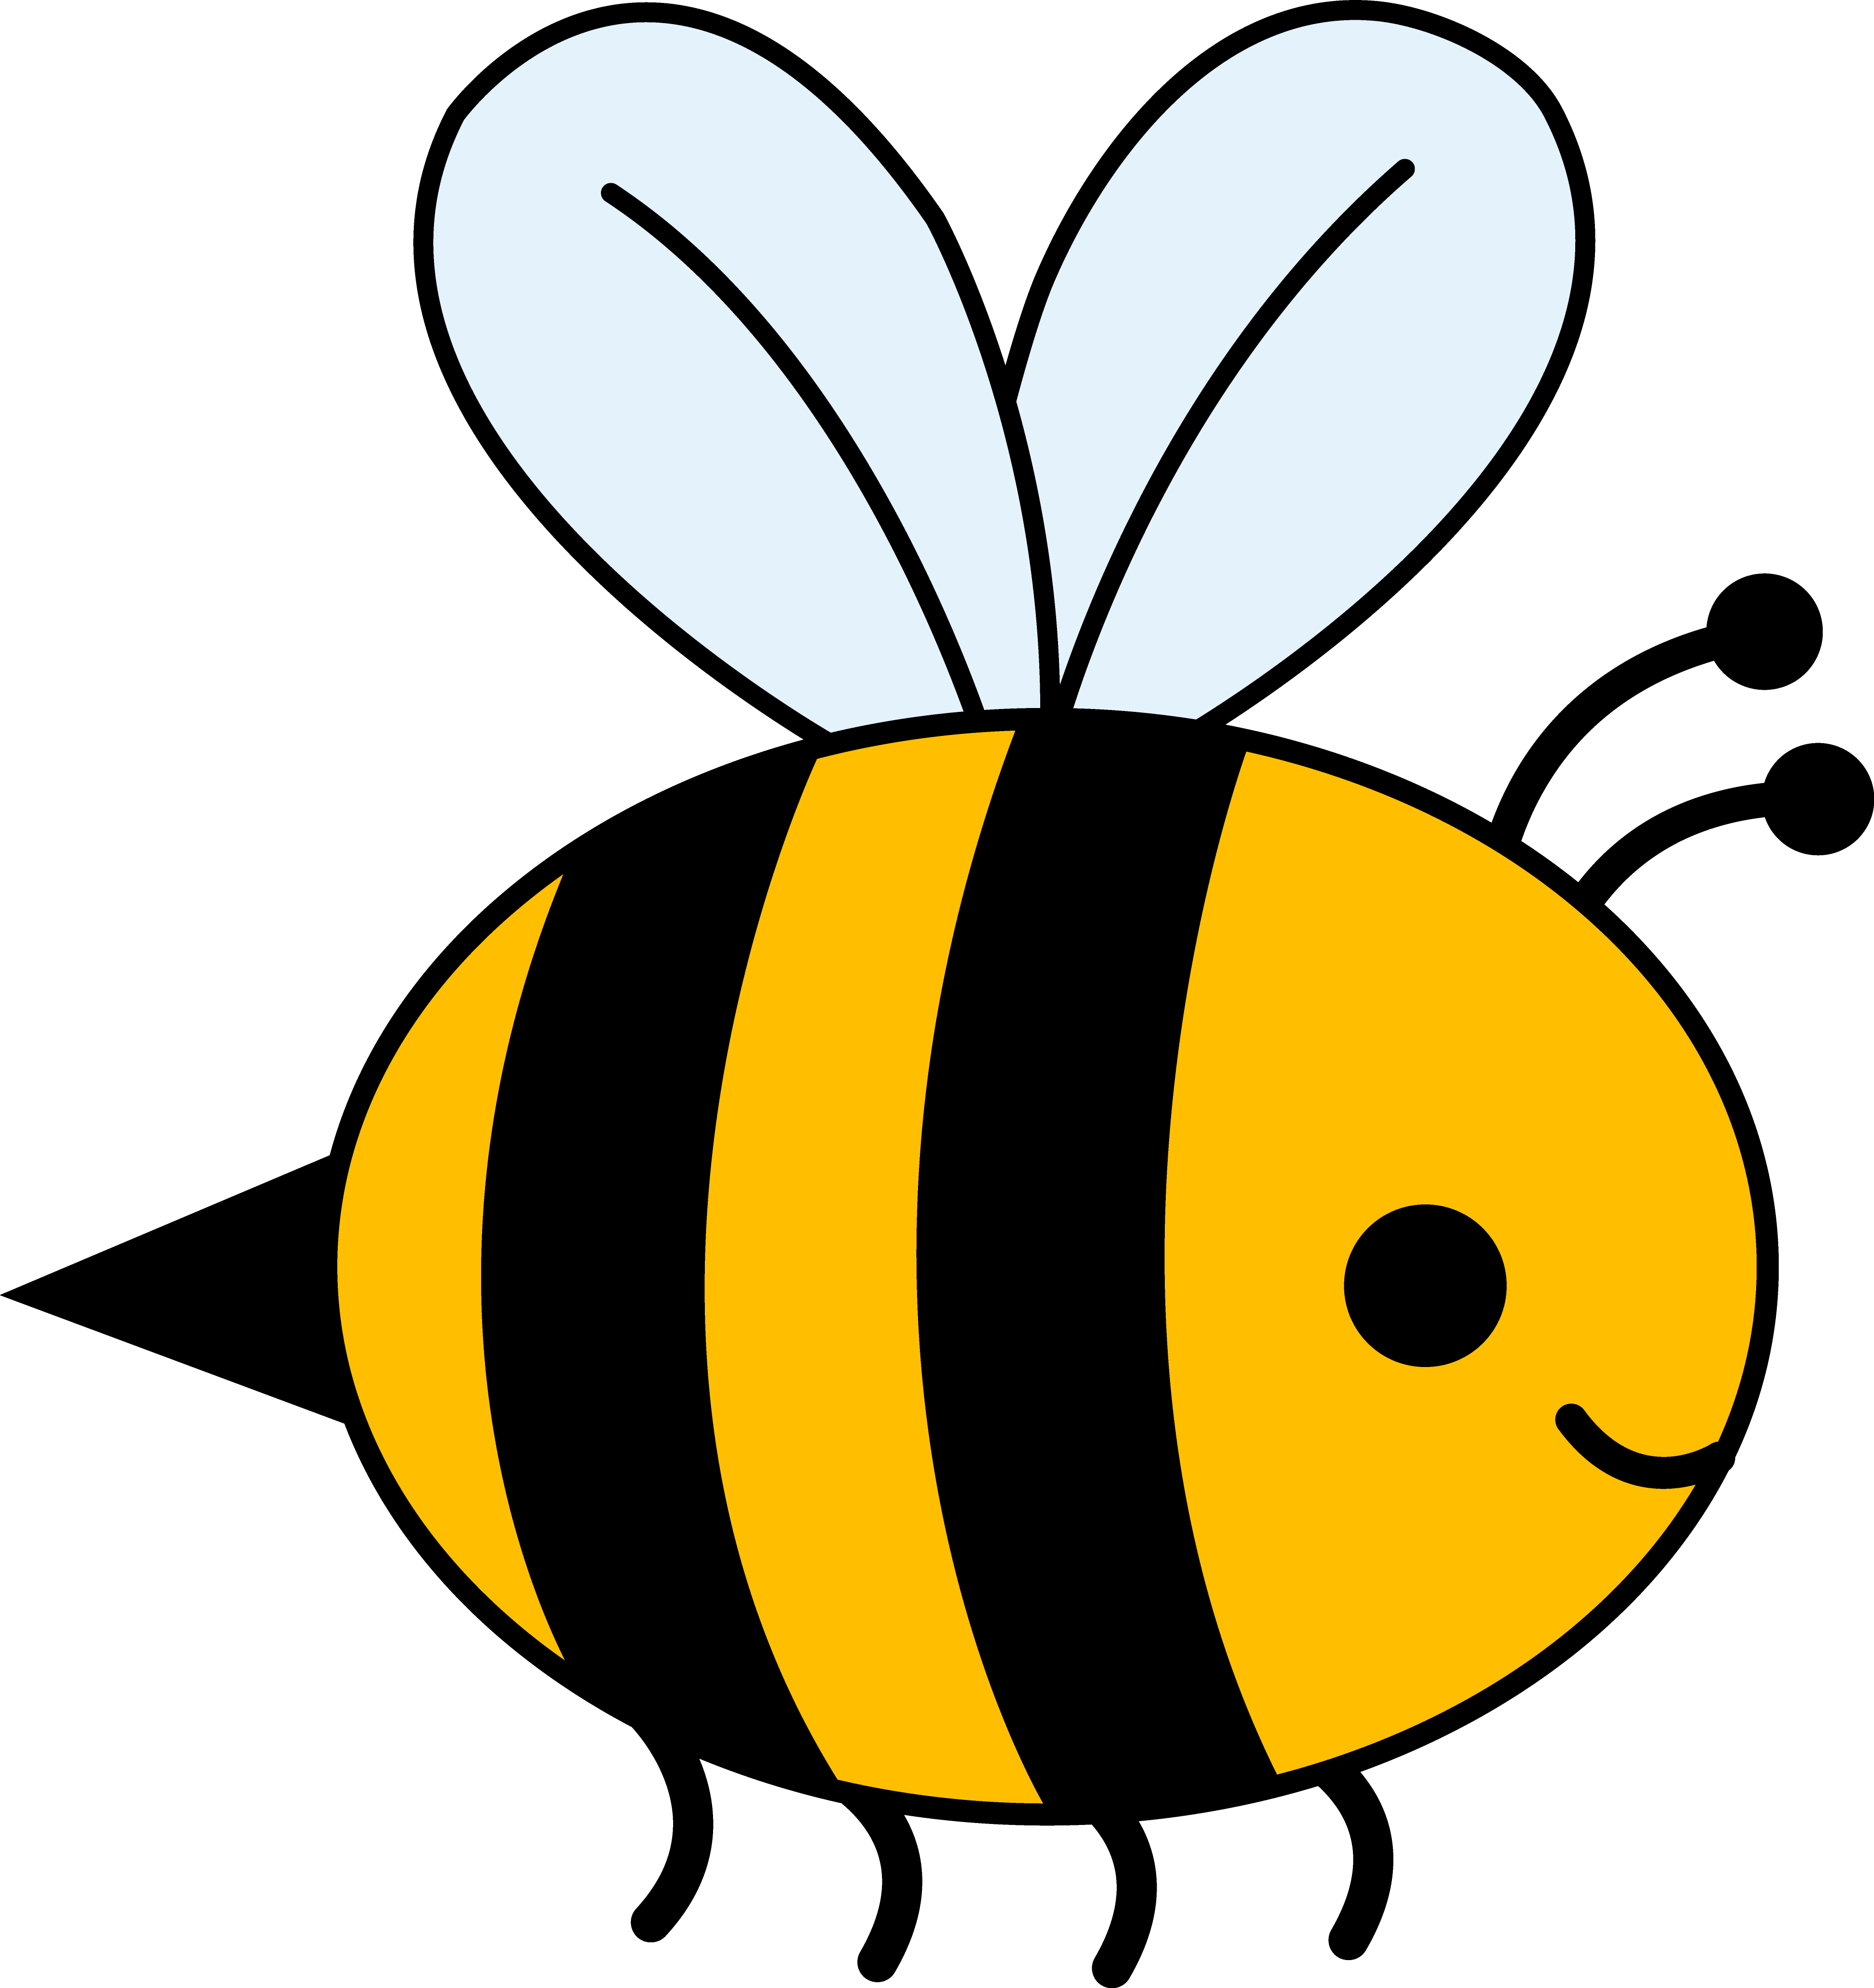 Picture Of A Bee - ClipArt Best